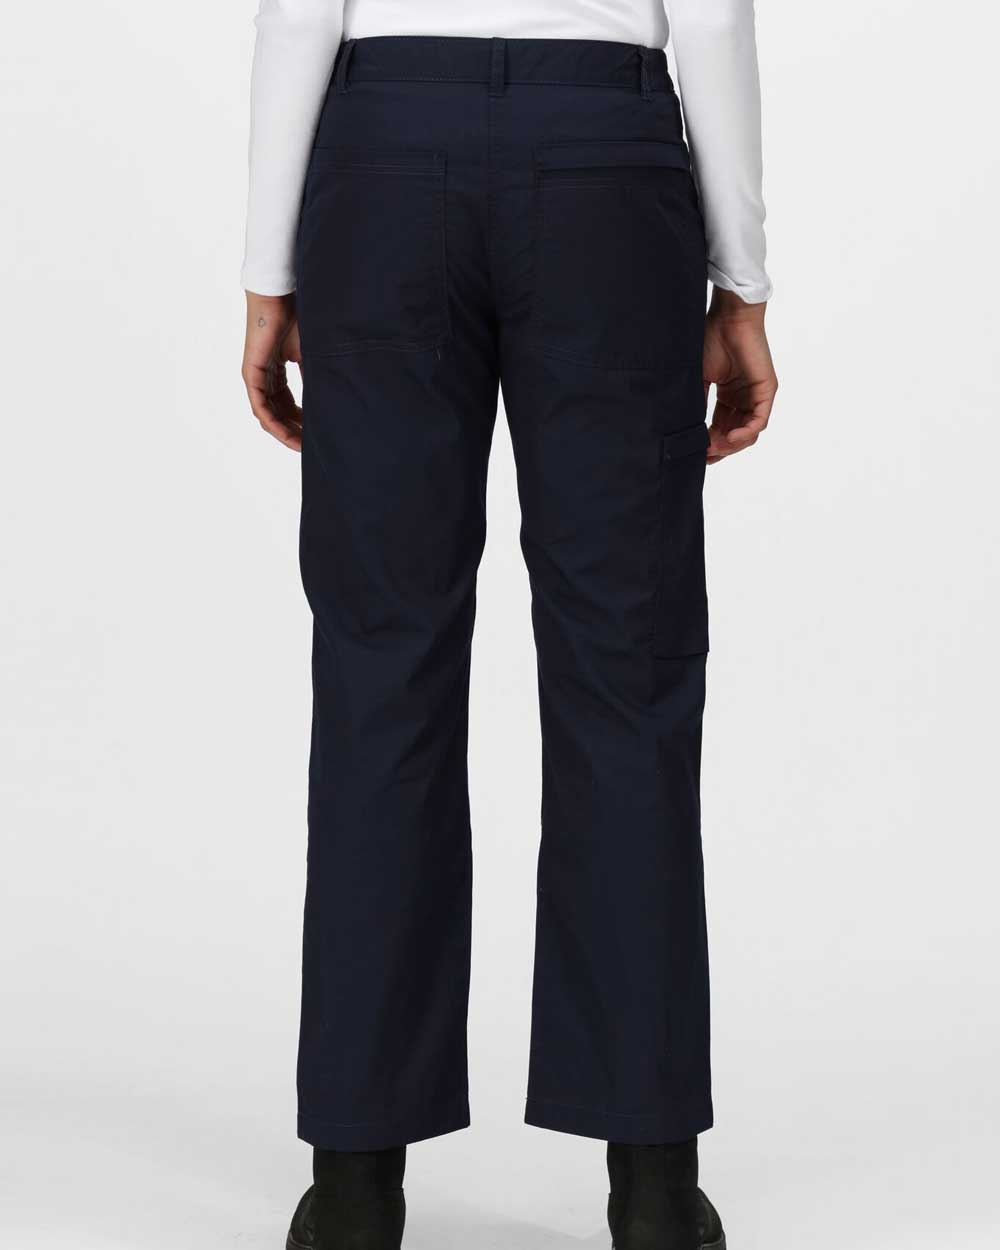 Regatta Womens New Action II Trousers in Navy 